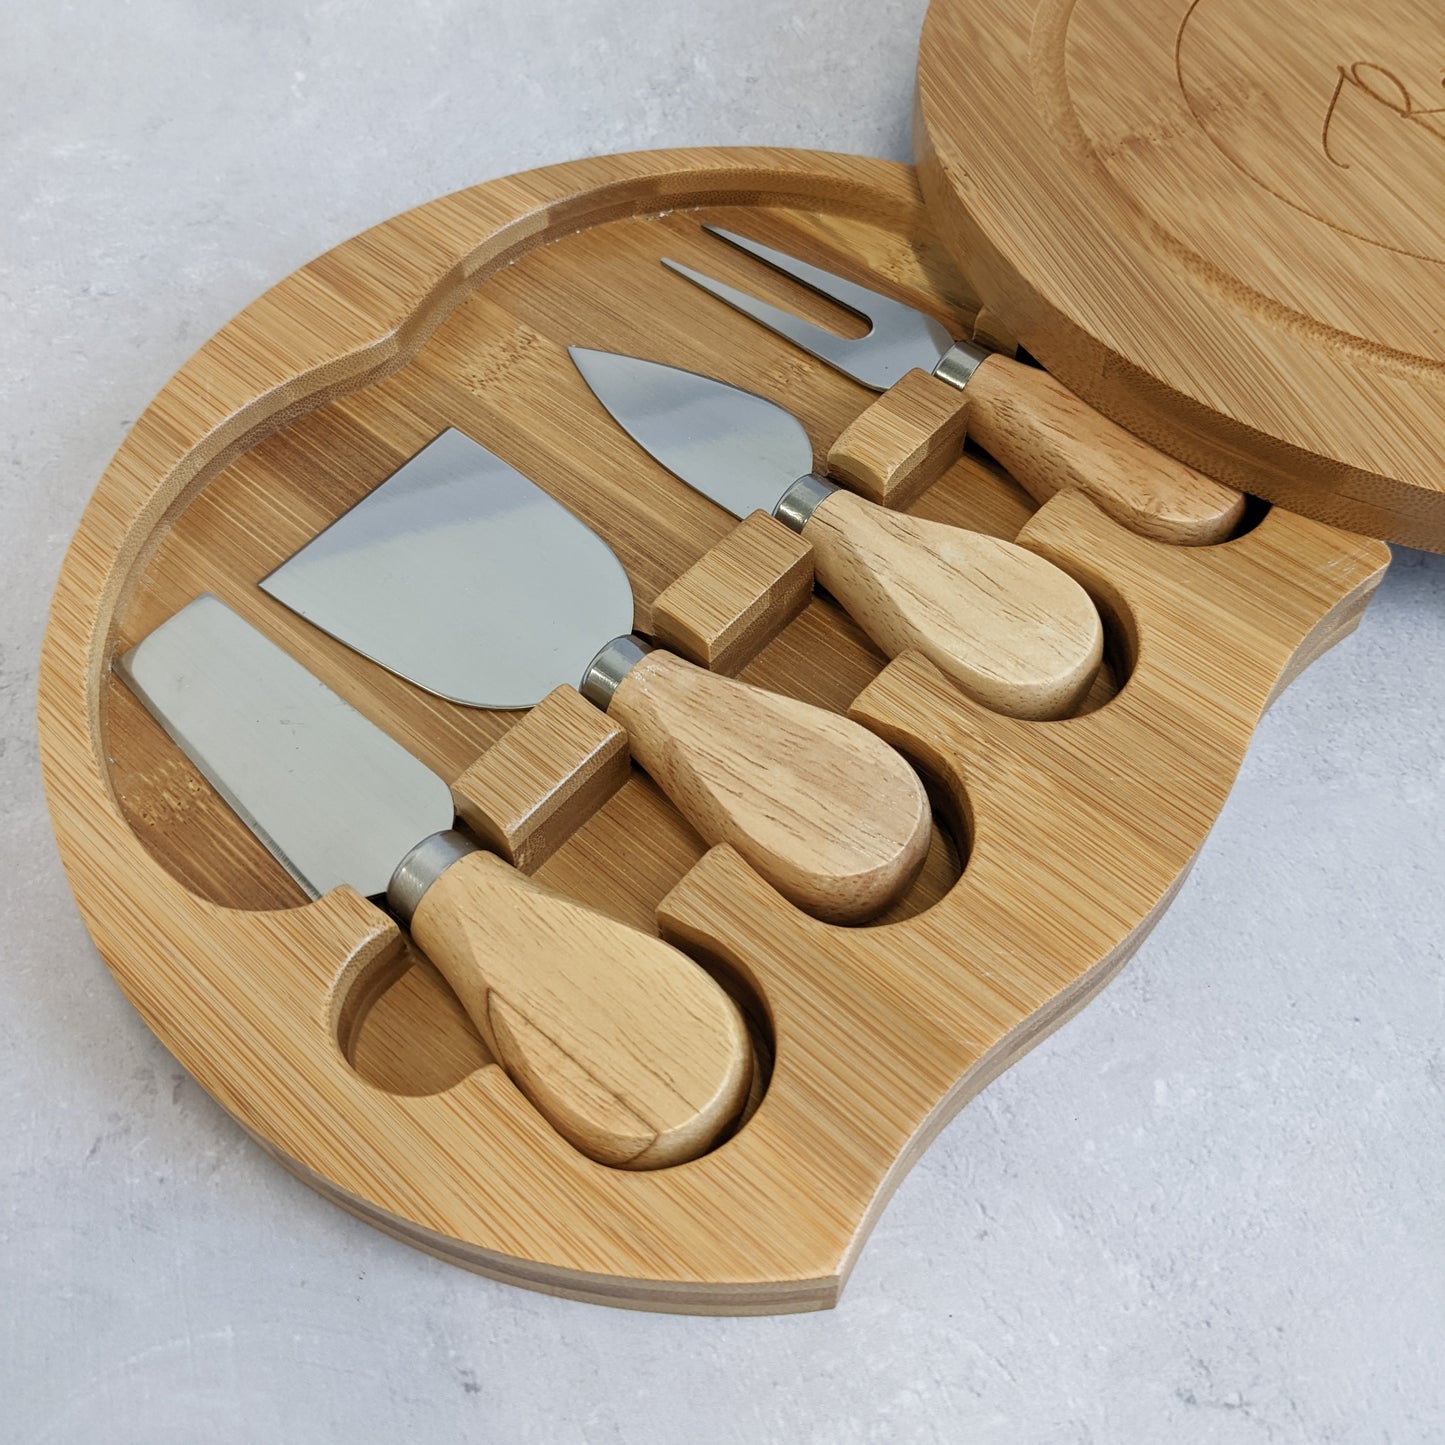 Wood Cheese Board Engraved Personalised - Serving Set - Wedding Anniversary Gift